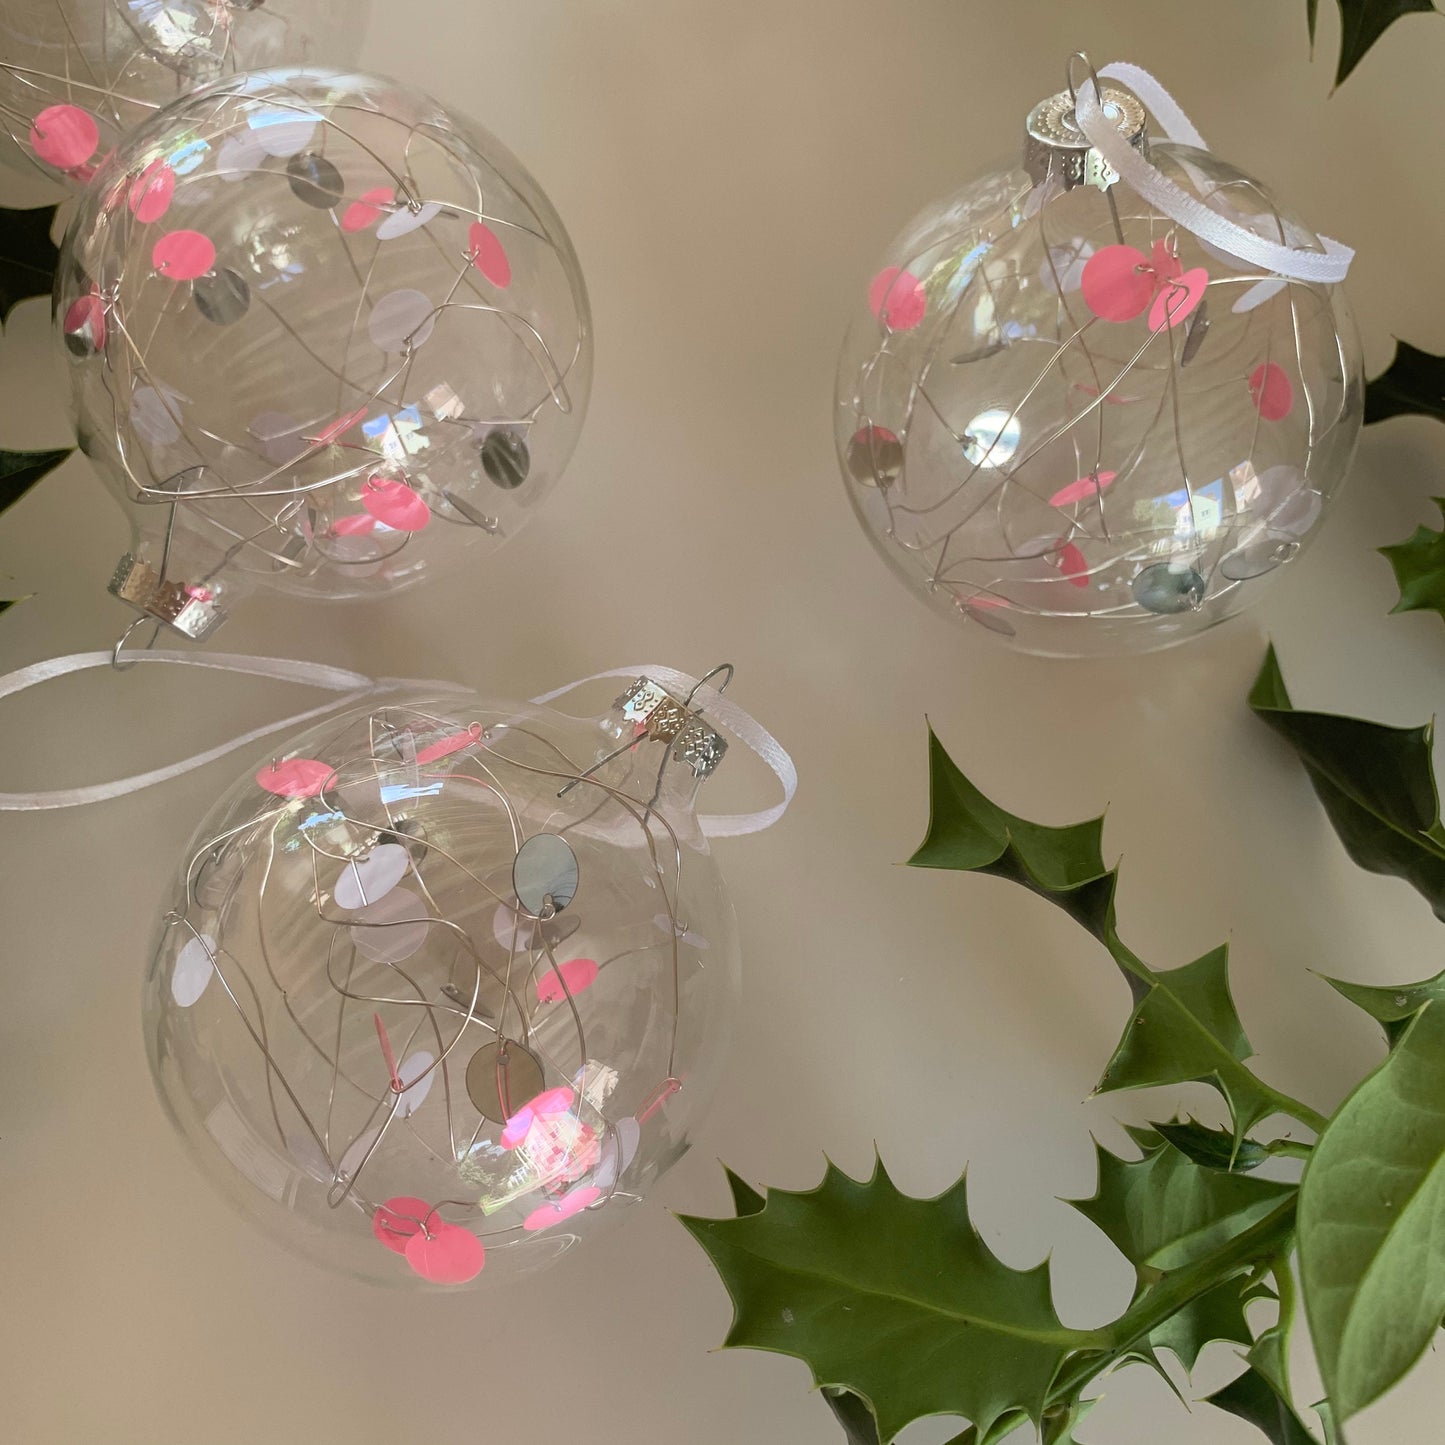 6 Sequin Unicorn Baubles - Glass Ornament - Christmas Tree Decoration - Clear Glass Xmas - Hand tied Sequins - Pink & White - 7cm